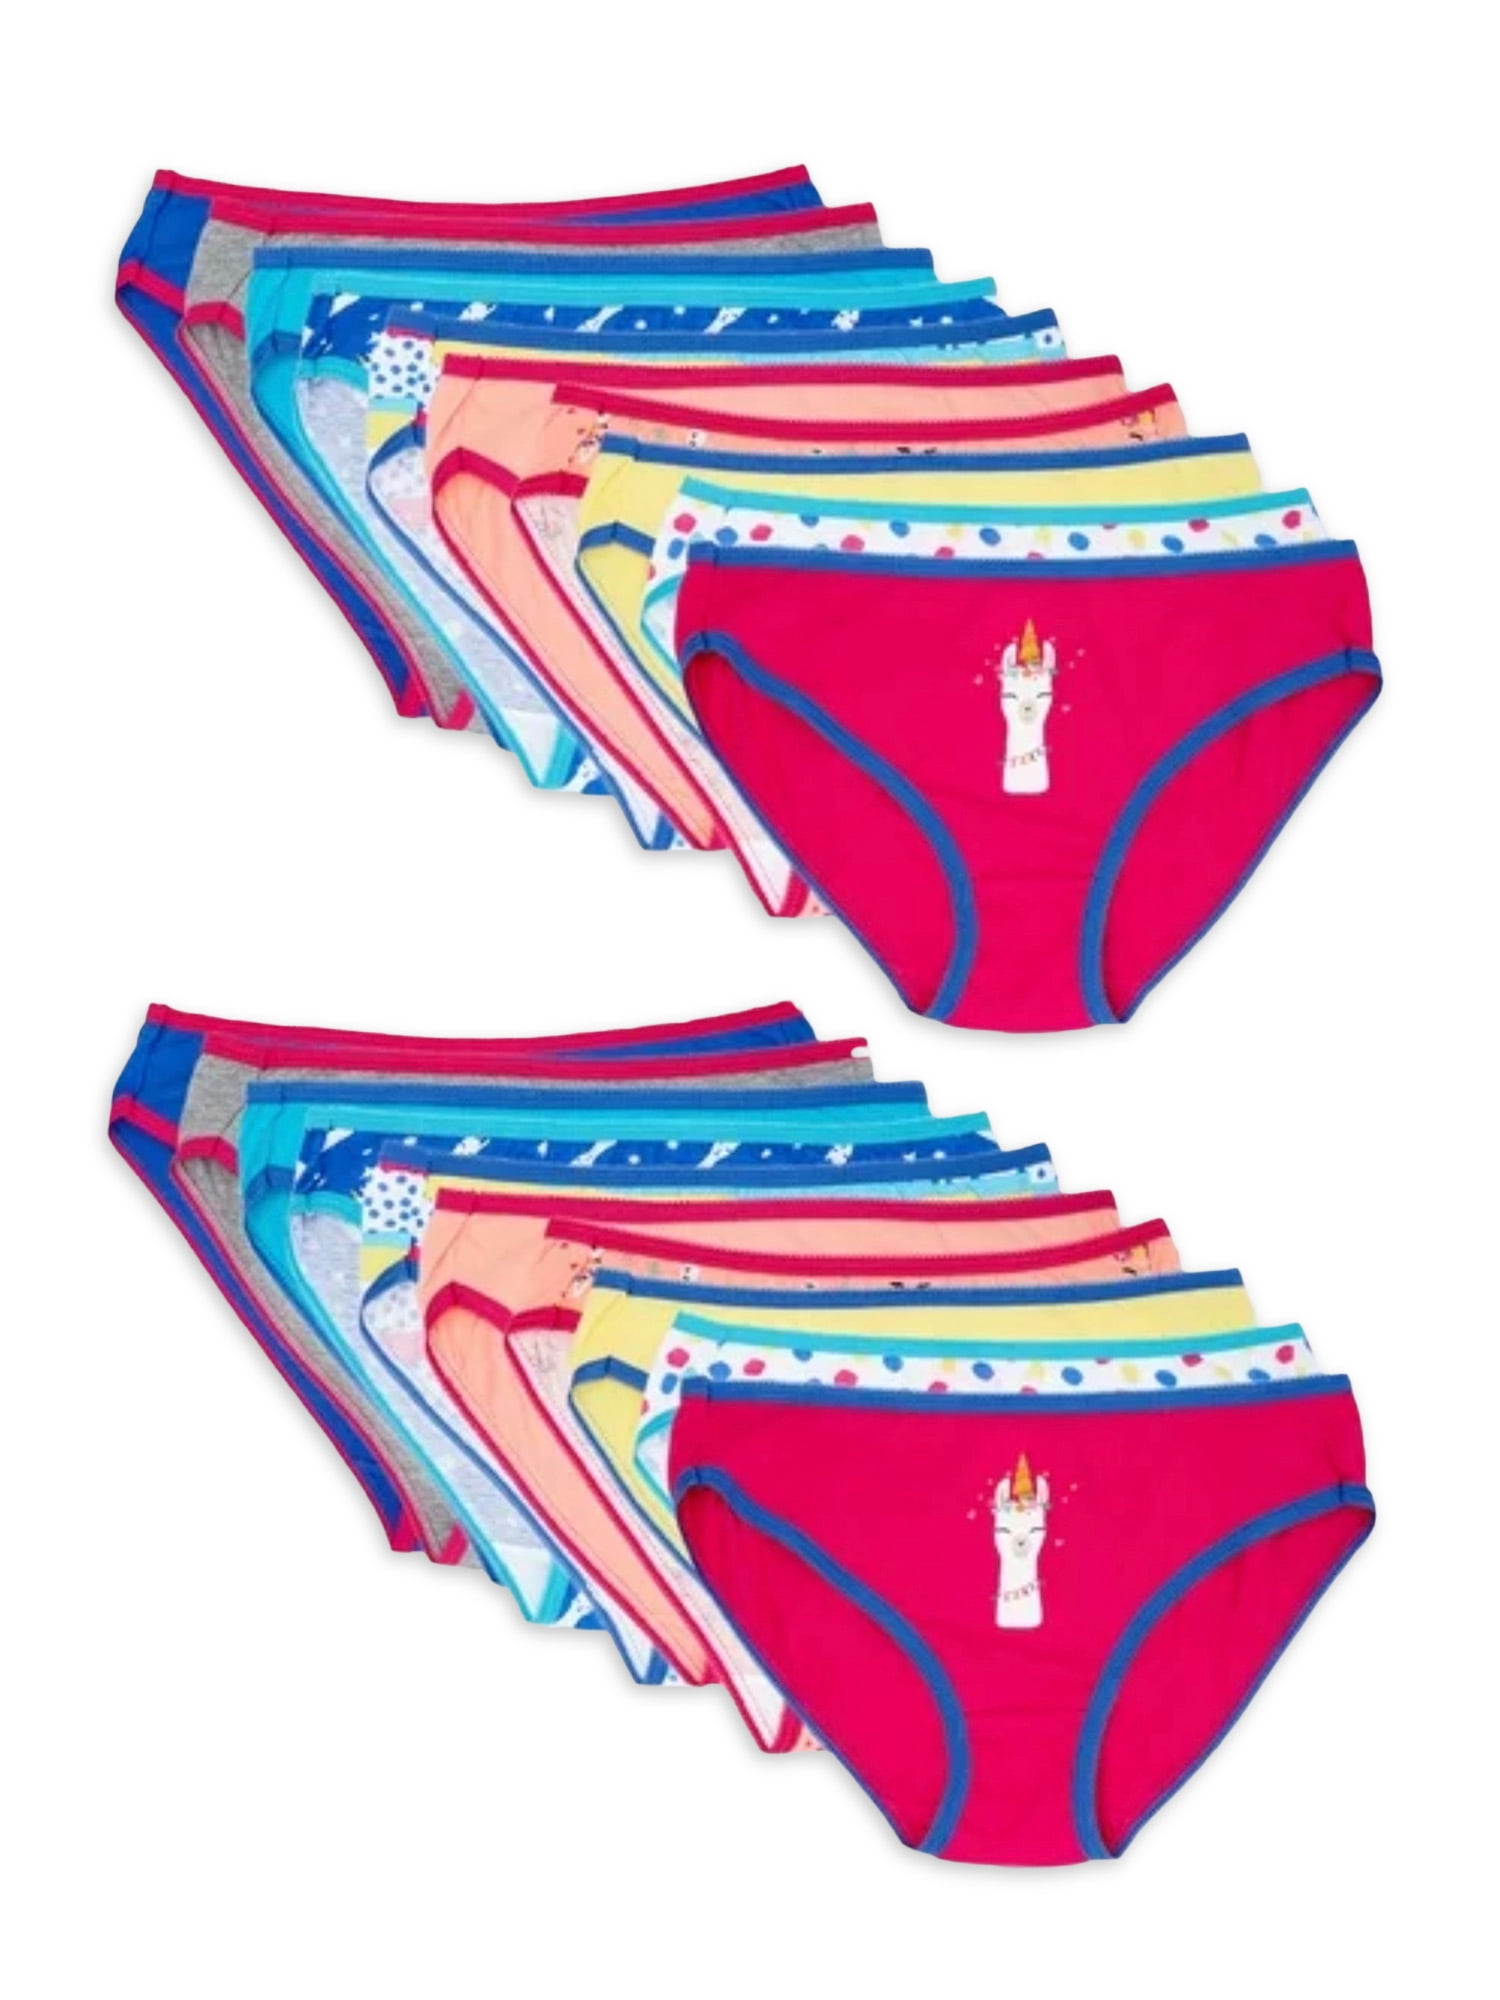 Chili Peppers Multicolor Bikini Underwear for Girls Cute Panties, 20-Pack,  Sizes 4-14